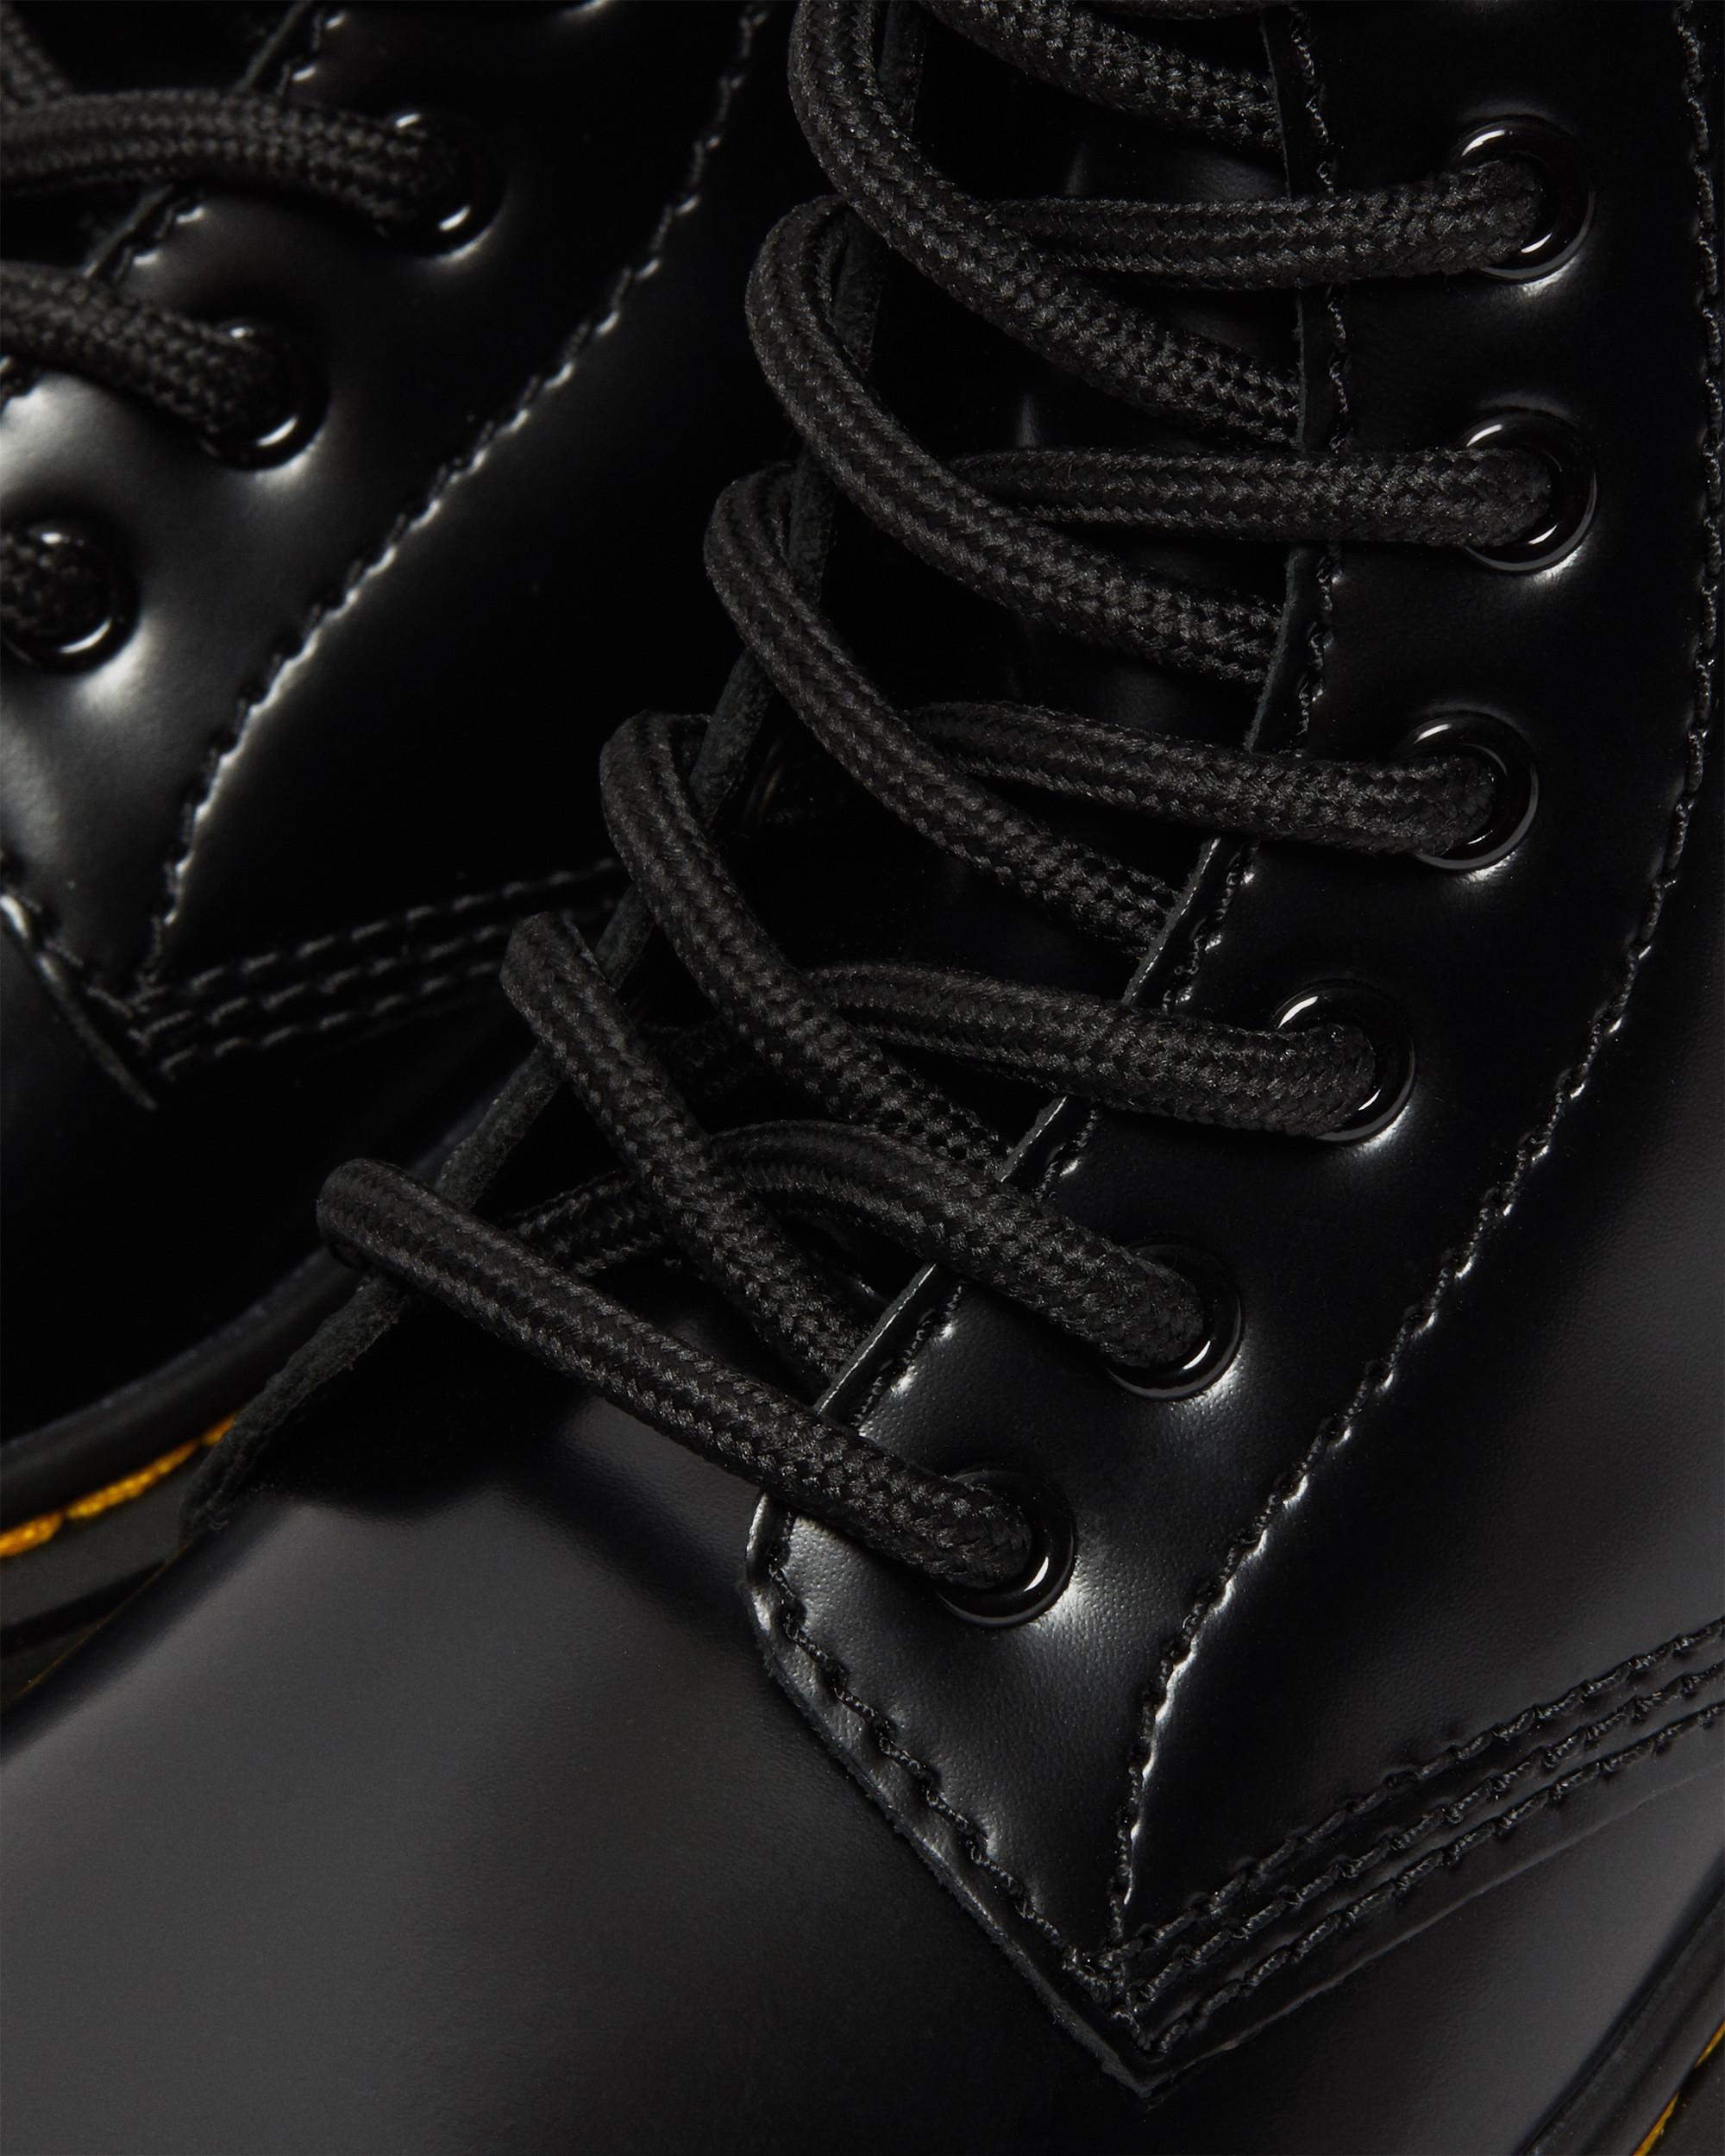 Junior 1460 Pascal Bex Leather Lace Up Boots in Black | Dr. Martens